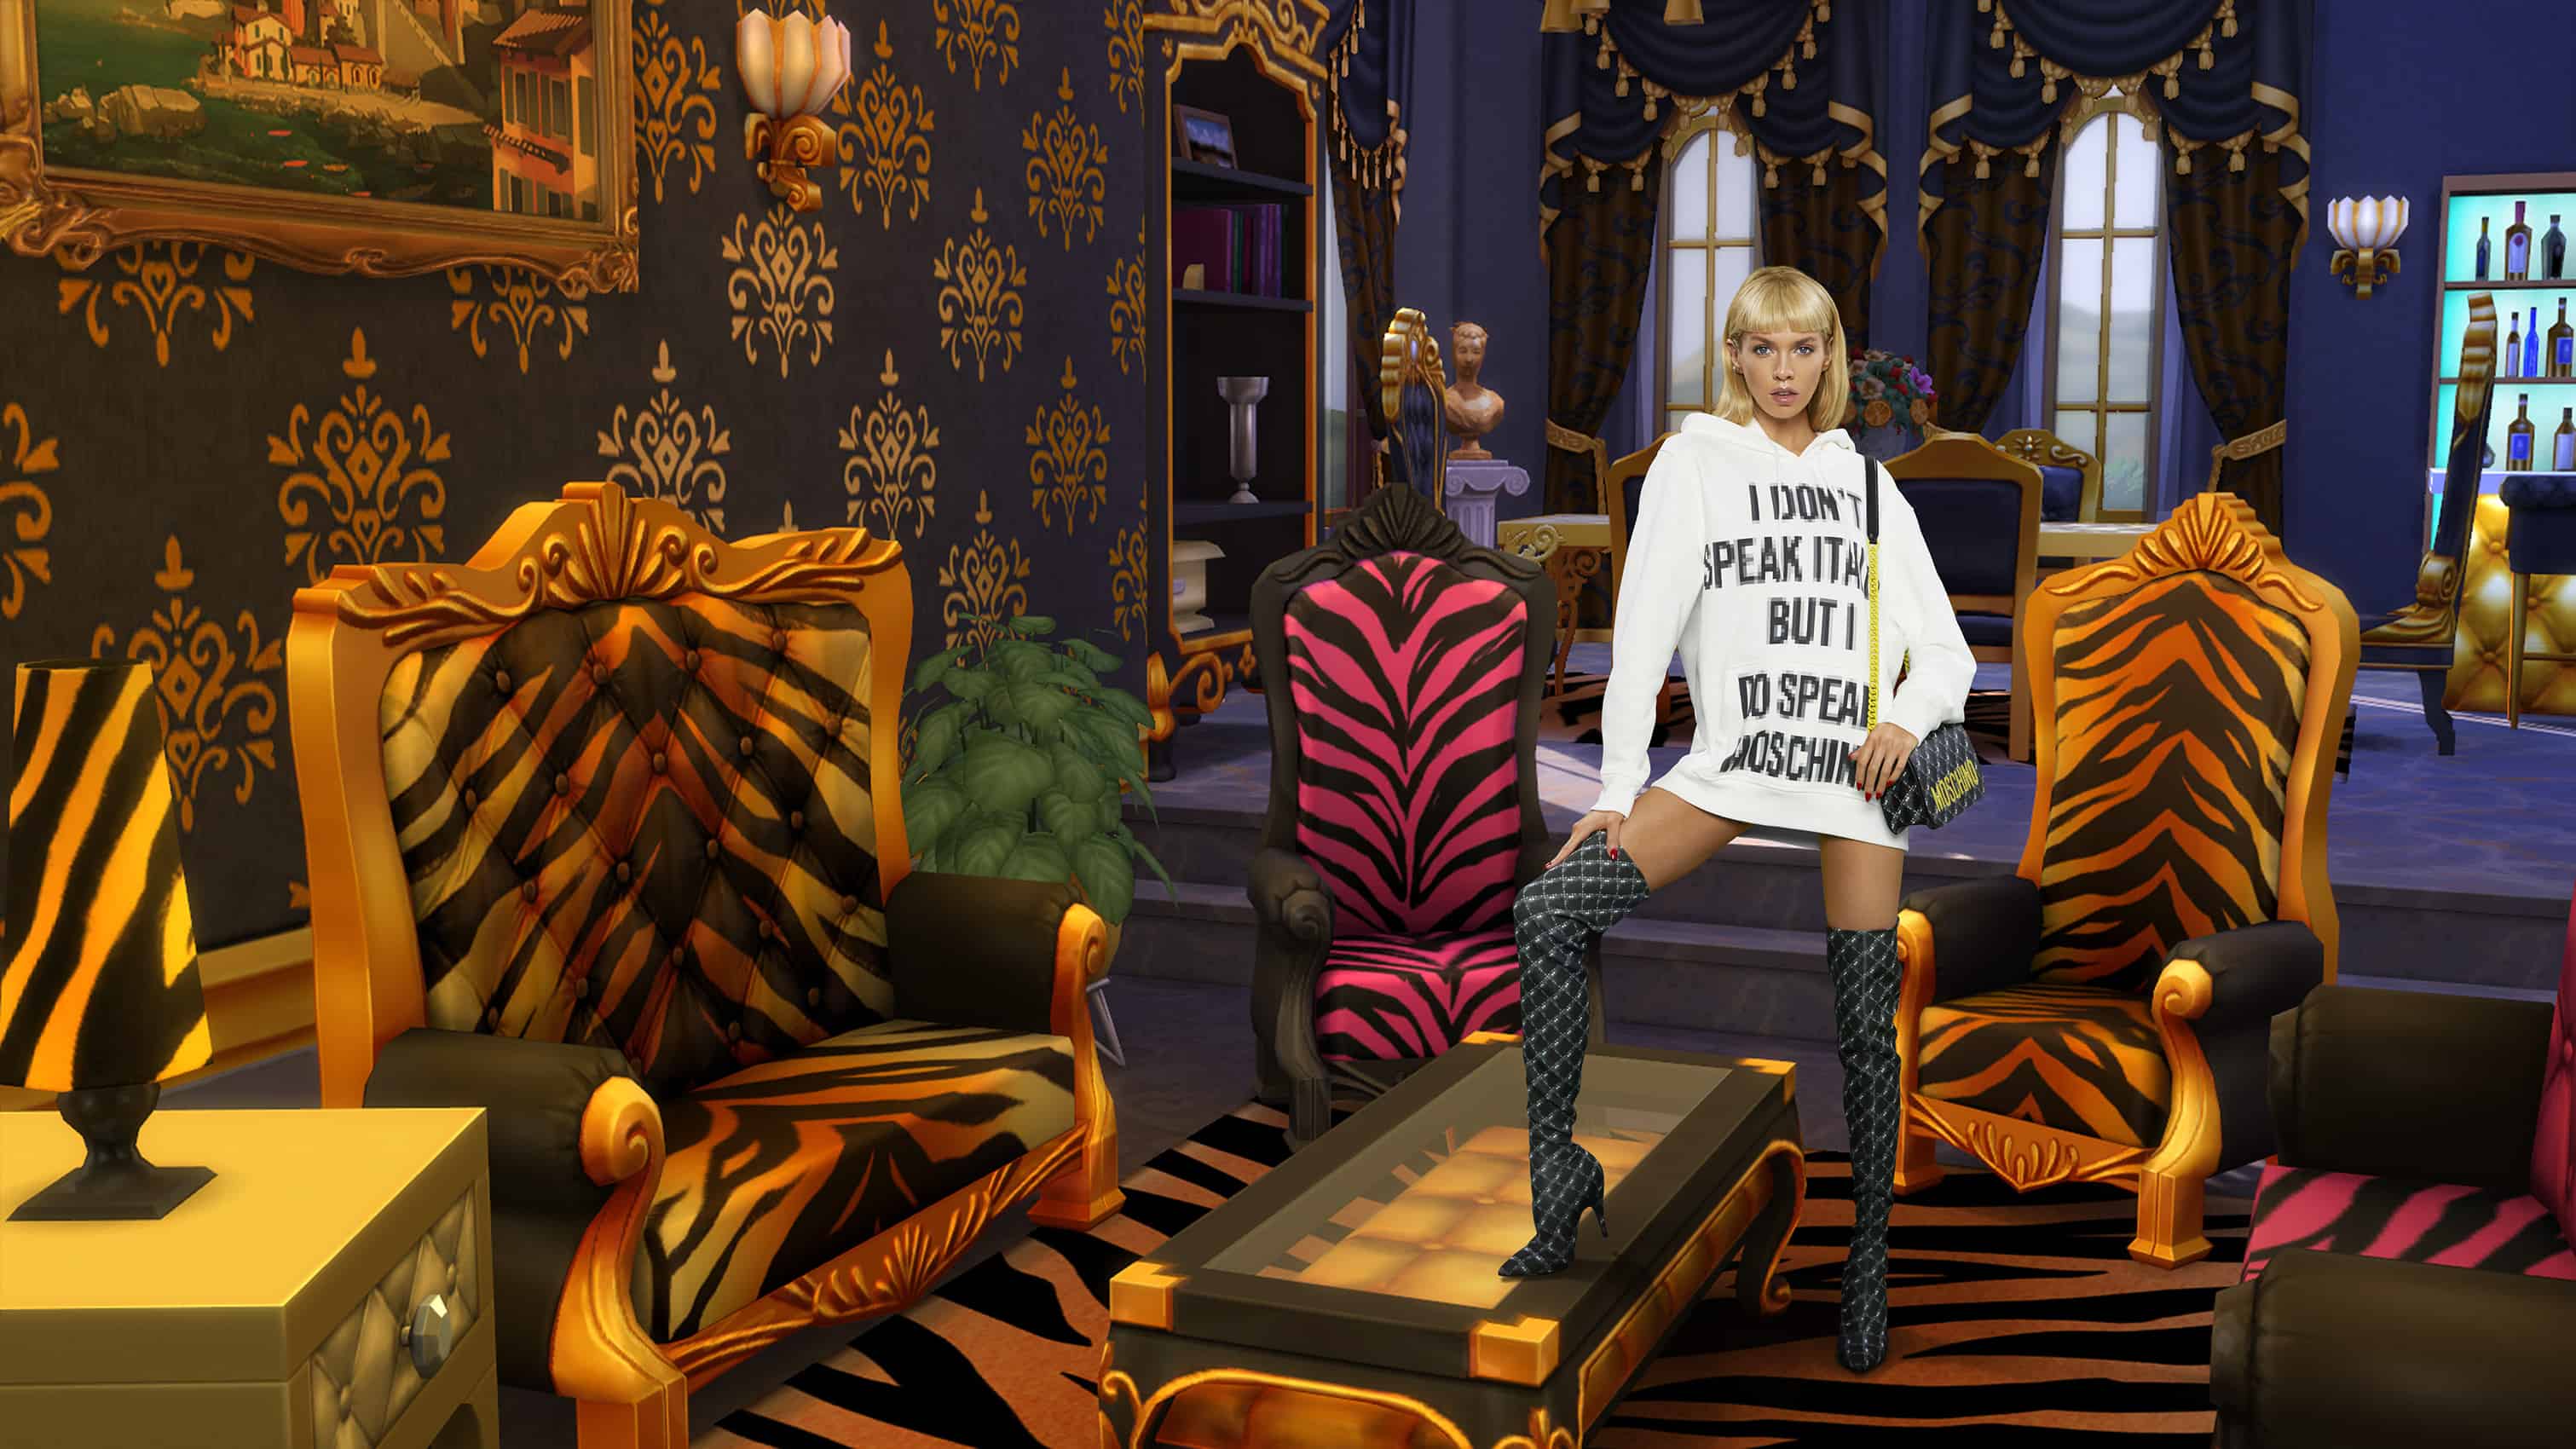 Moschino and The Sims Throw a Coachella Desert Party - PAPER Magazine